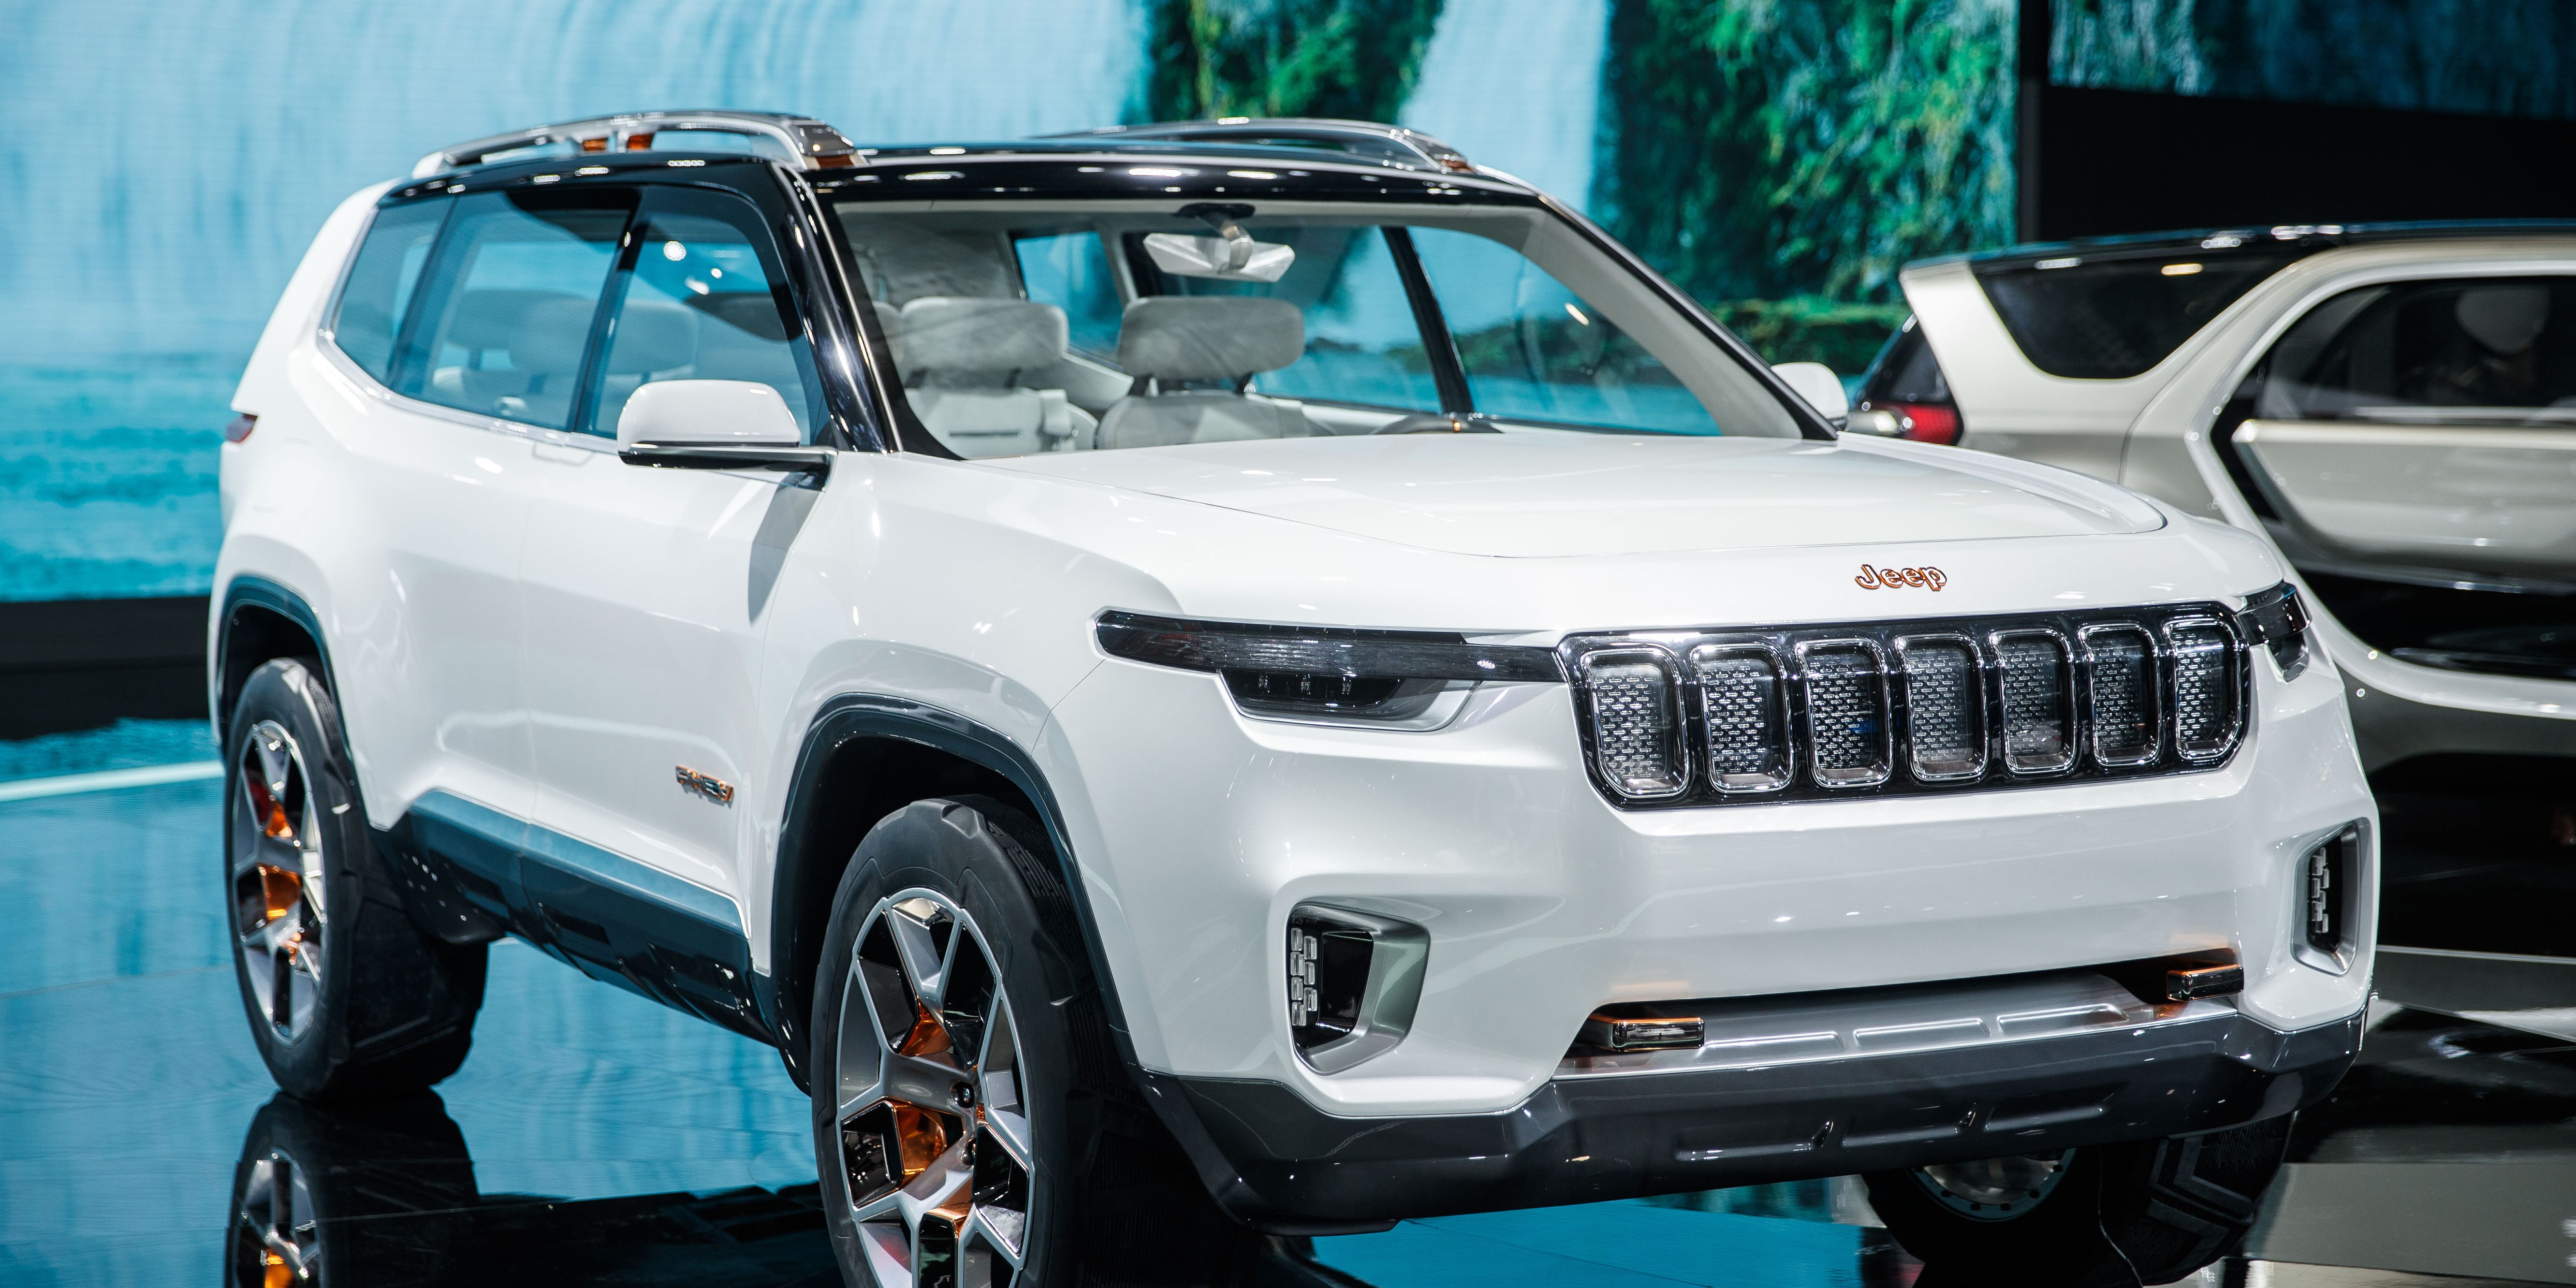 Jeep's plugin hybrid SUV concept debuts with a 40 miles allelectric range Electrek